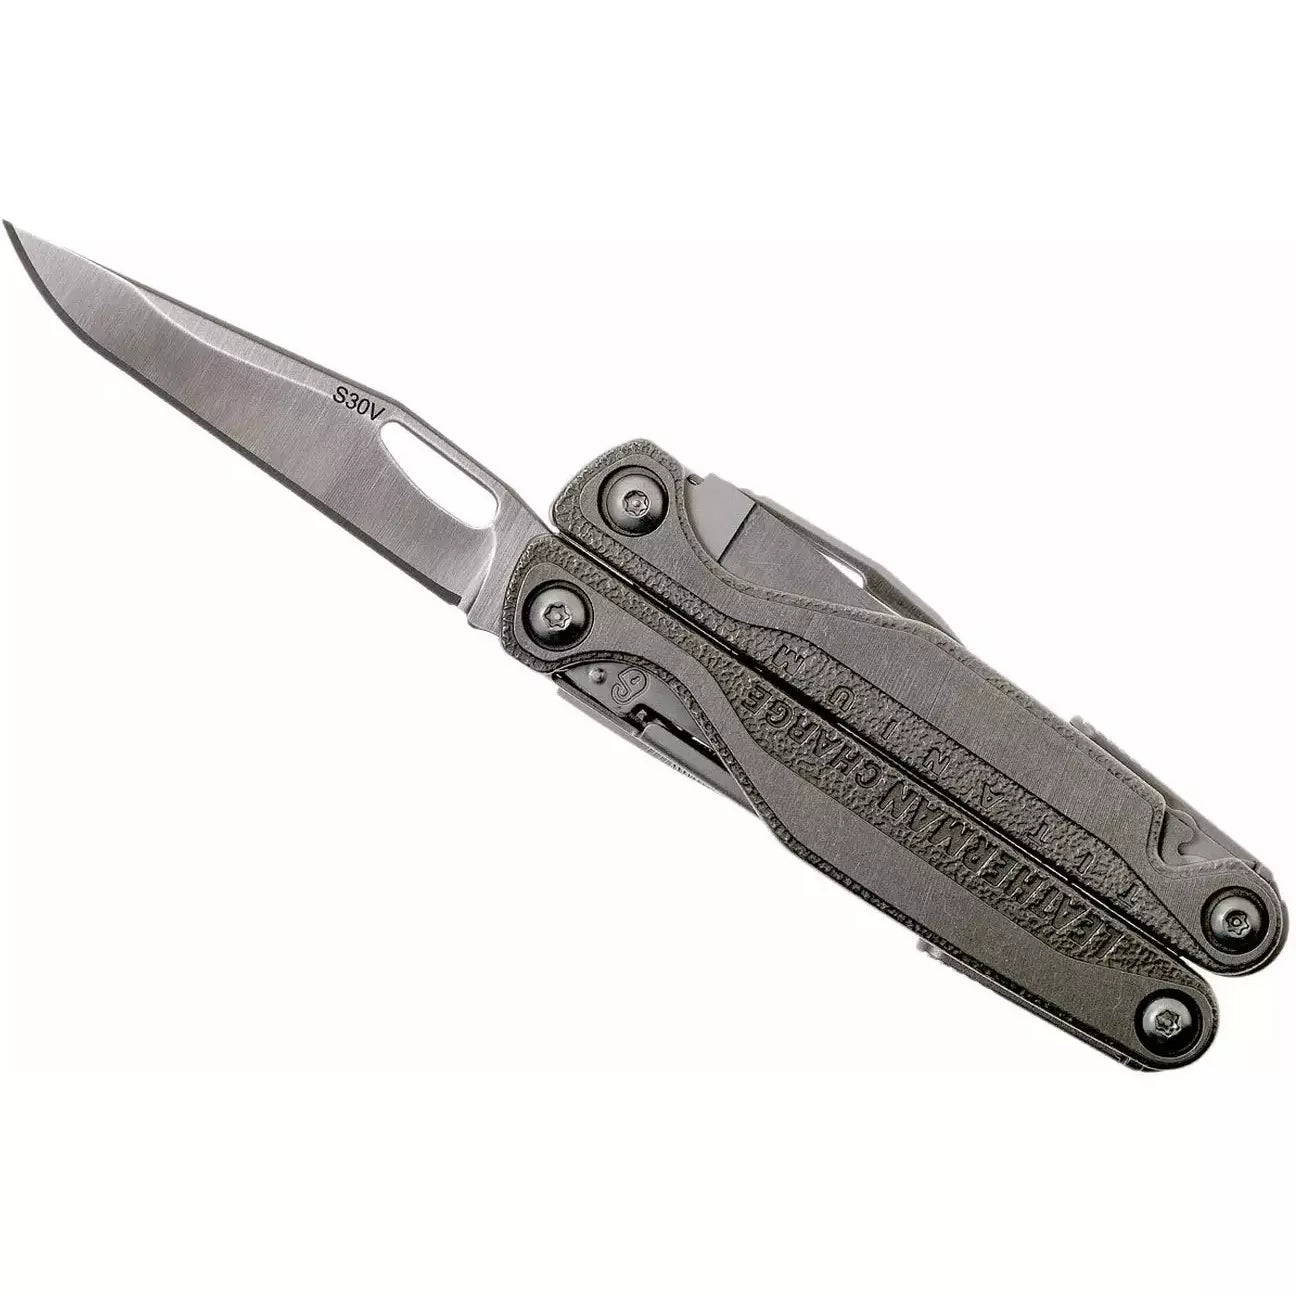 OUTIL LEATHERMAN CHARGE + TTI